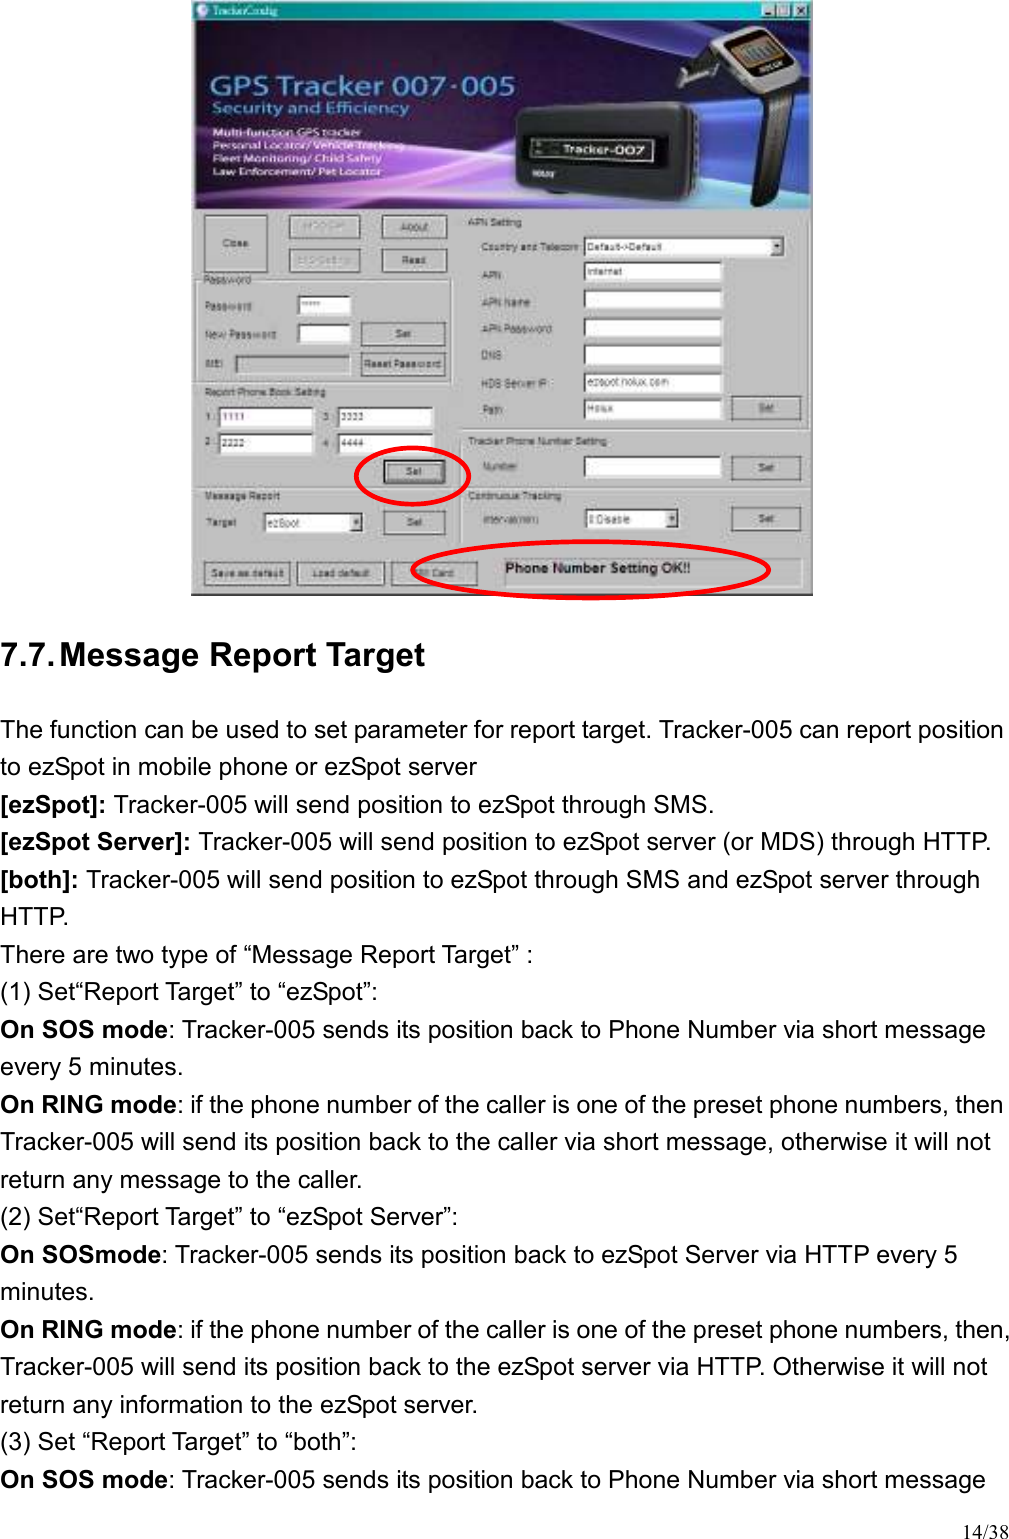 14/38  7.7. Message Report Target The function can be used to set parameter for report target. Tracker-005 can report position to ezSpot in mobile phone or ezSpot server [ezSpot]: Tracker-005 will send position to ezSpot through SMS. [ezSpot Server]: Tracker-005 will send position to ezSpot server (or MDS) through HTTP. [both]: Tracker-005 will send position to ezSpot through SMS and ezSpot server through HTTP. There are two type of “Message Report Target” : (1) Set“Report Target” to “ezSpot”: On SOS mode: Tracker-005 sends its position back to Phone Number via short message every 5 minutes. On RING mode: if the phone number of the caller is one of the preset phone numbers, then Tracker-005 will send its position back to the caller via short message, otherwise it will not return any message to the caller. (2) Set“Report Target” to “ezSpot Server”: On SOSmode: Tracker-005 sends its position back to ezSpot Server via HTTP every 5 minutes. On RING mode: if the phone number of the caller is one of the preset phone numbers, then, Tracker-005 will send its position back to the ezSpot server via HTTP. Otherwise it will not return any information to the ezSpot server. (3) Set “Report Target” to “both”: On SOS mode: Tracker-005 sends its position back to Phone Number via short message 